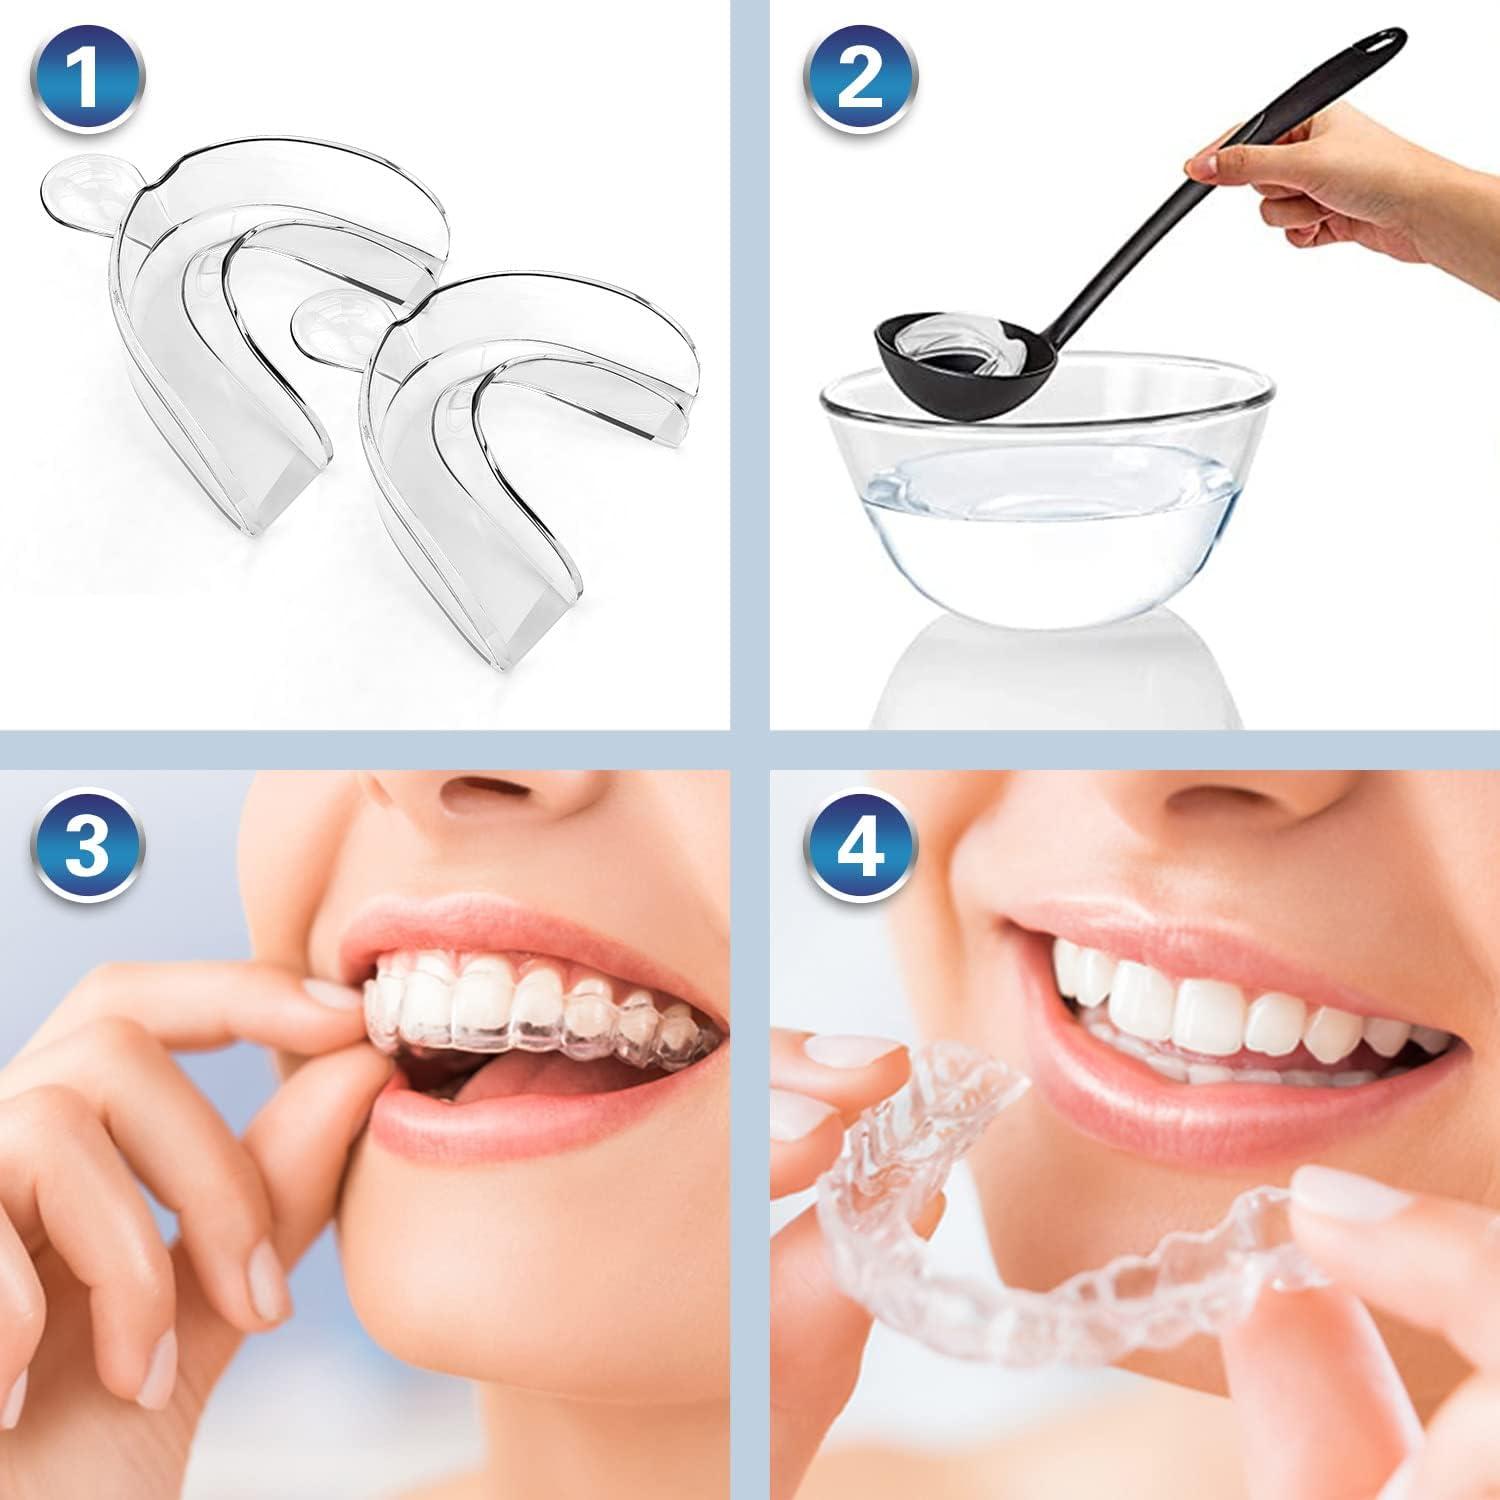 Teeth Whitening Trays Moldable Teeth Whitening Tray With LED Light